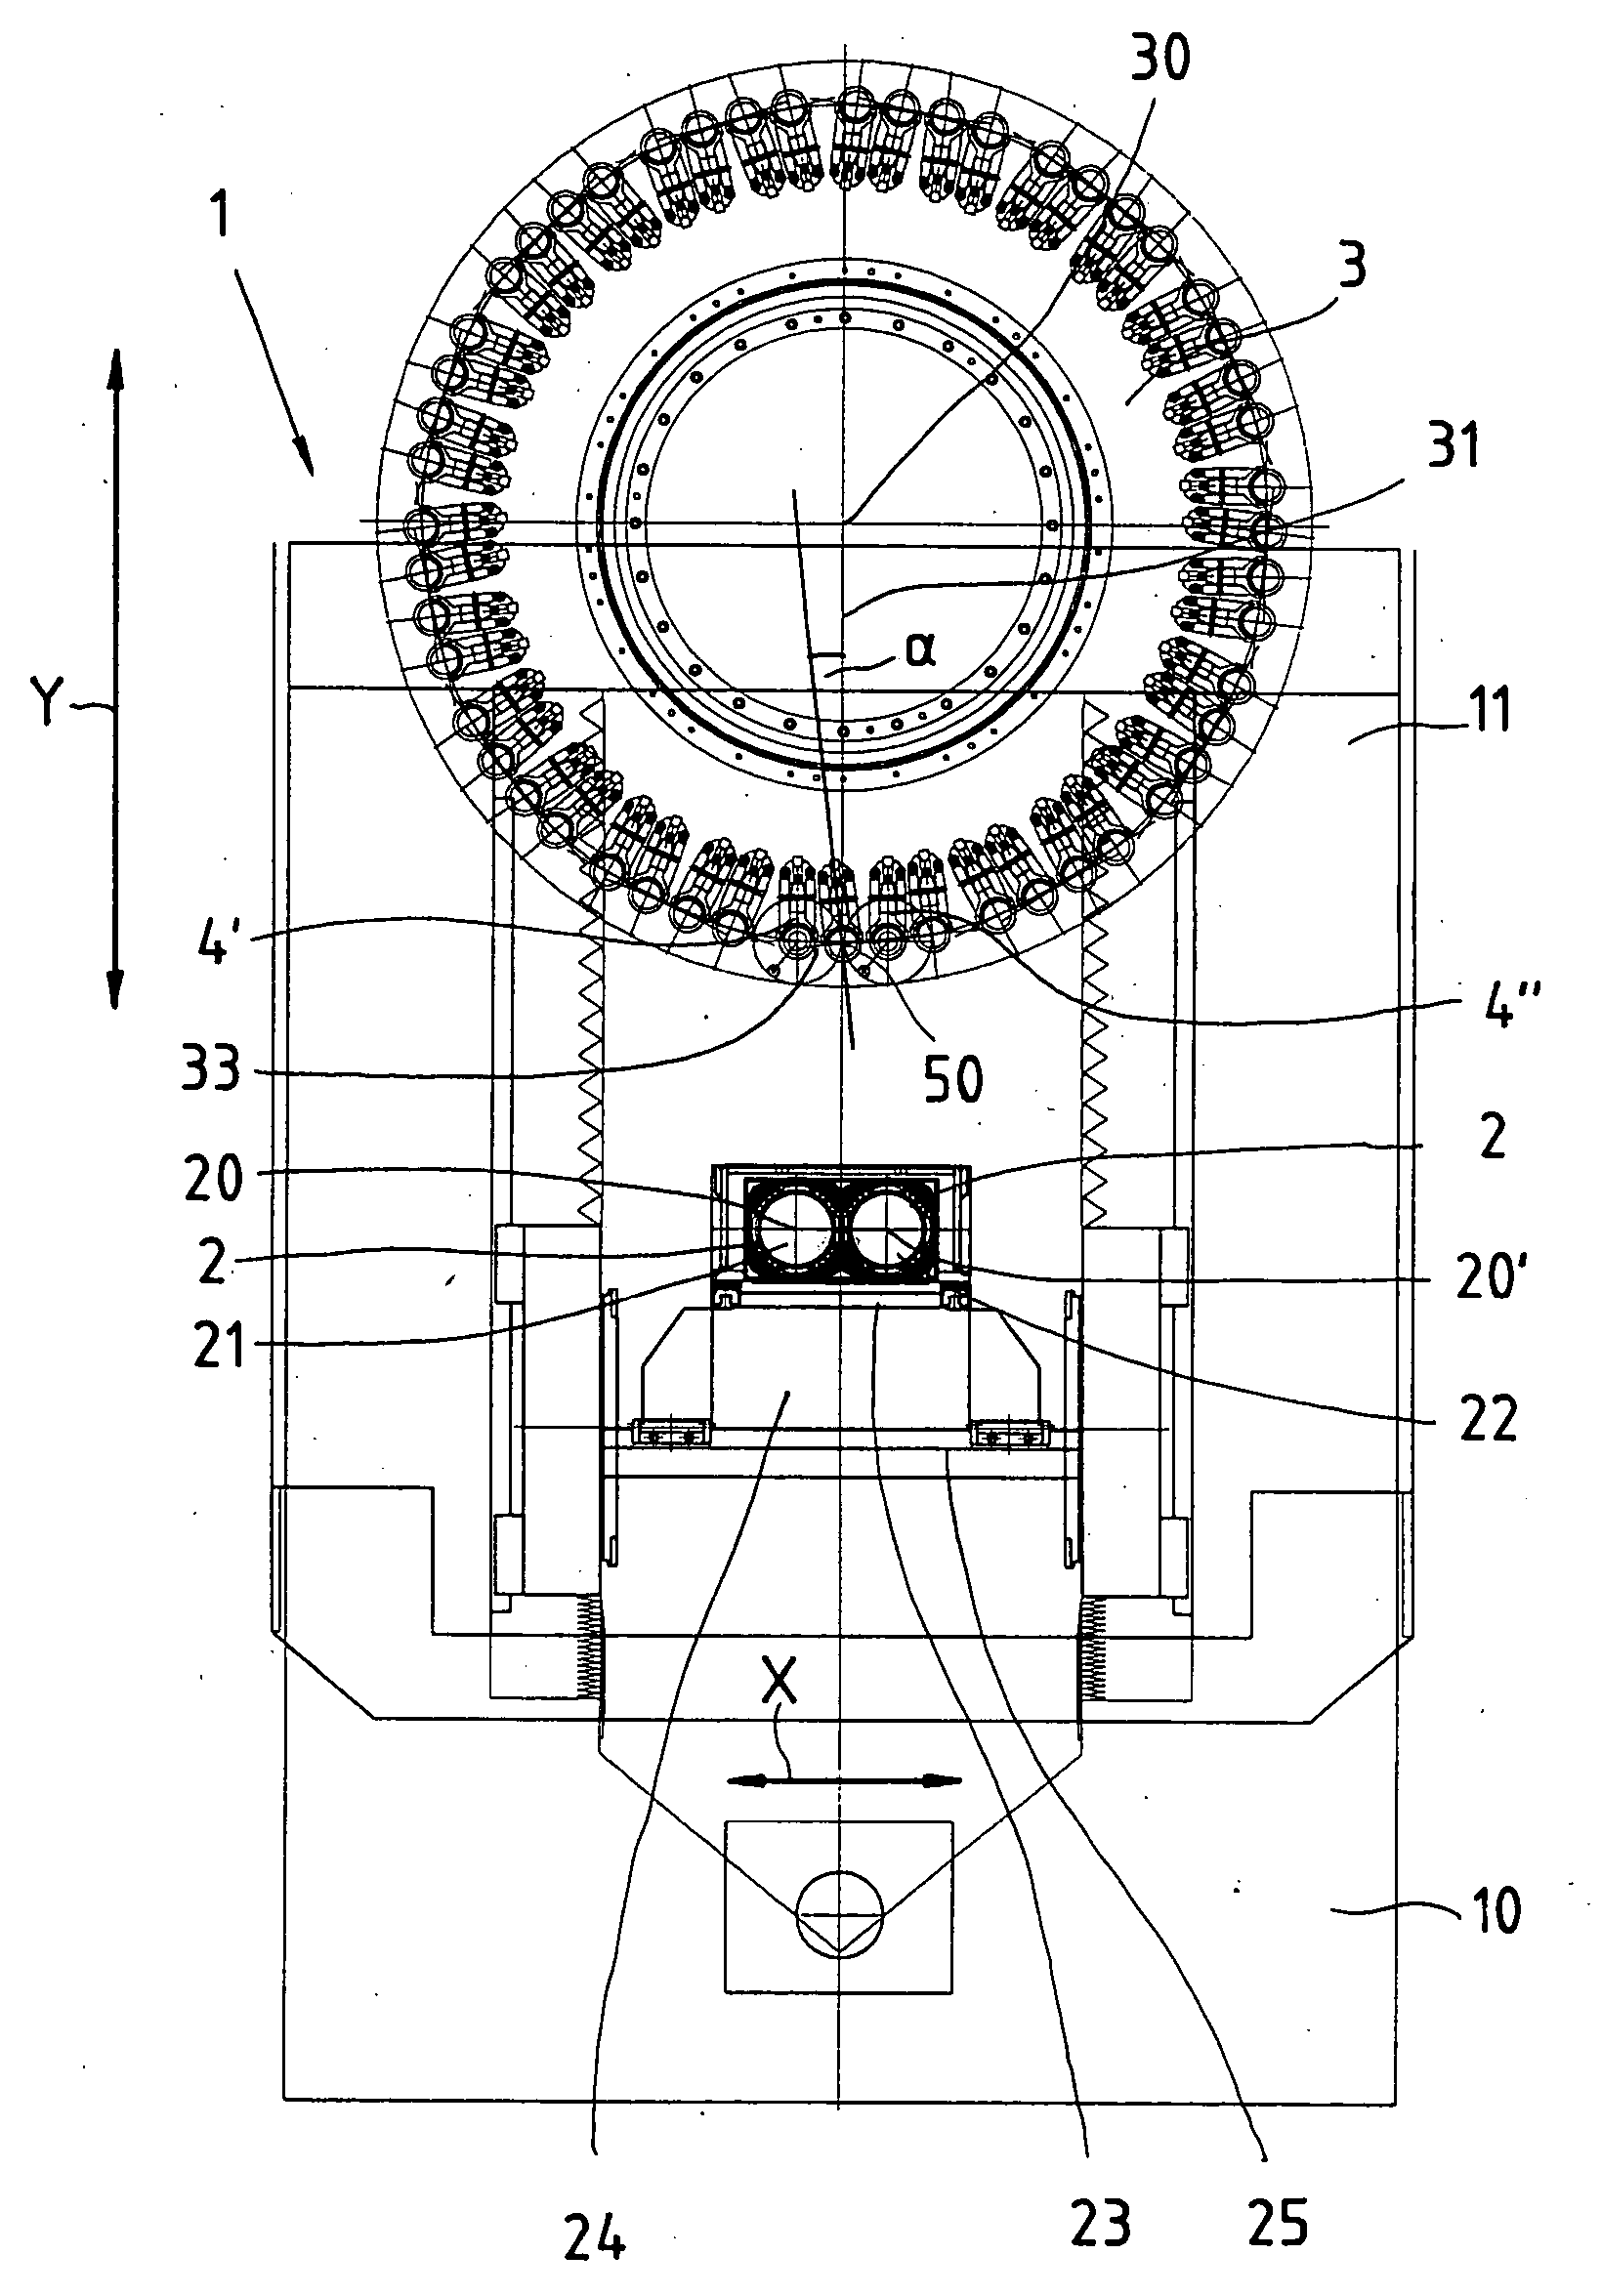 Machine tool with a work spindle